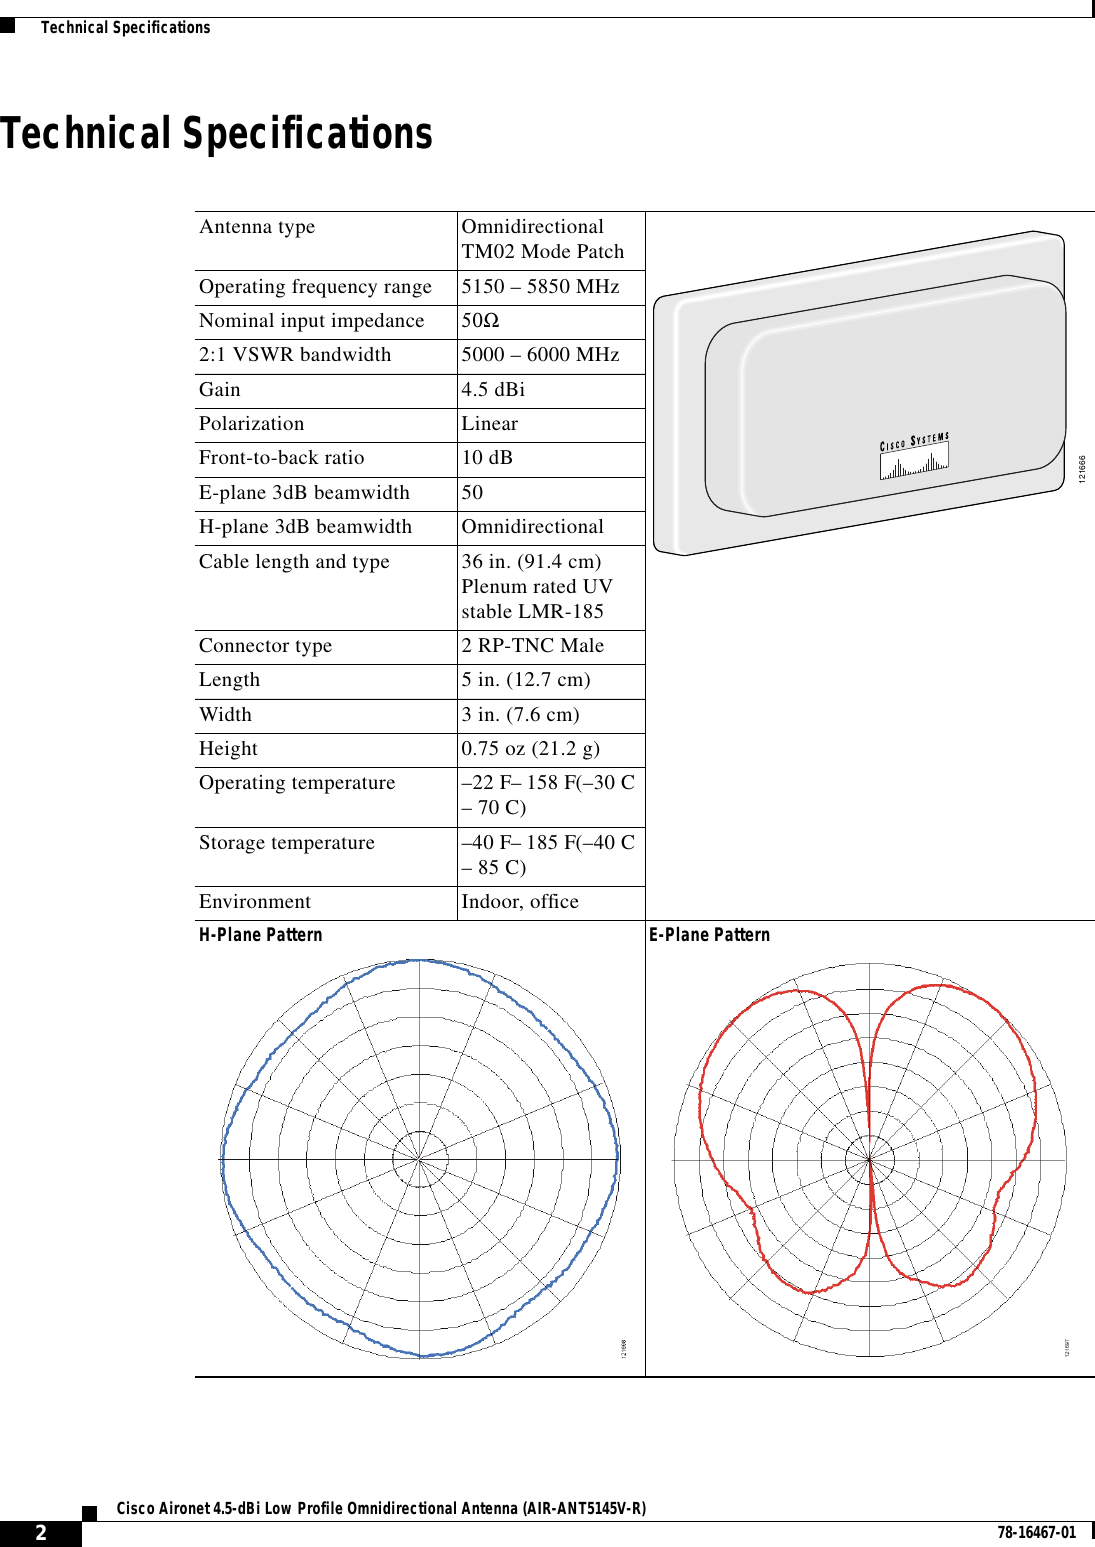 2Cisco Aironet 4.5-dBi Low Profile Omnidirectional Antenna (AIR-ANT5145V-R) 78-16467-01  Technical SpecificationsTechnical SpecificationsAntenna type OmnidirectionalTM02 Mode PatchOperating frequency range 5150 – 5850 MHzNominal input impedance 50Ω2:1 VSWR bandwidth 5000 – 6000 MHzGain 4.5 dBiPolarization LinearFront-to-back ratio 10 dBE-plane 3dB beamwidth 50H-plane 3dB beamwidth OmnidirectionalCable length and type 36 in. (91.4 cm)Plenum rated UVstable LMR-185Connector type 2 RP-TNC MaleLength 5 in. (12.7 cm)Width 3 in. (7.6 cm)Height 0.75 oz (21.2 g)Operating temperature –22 F– 158 F(–30 C– 70 C)Storage temperature –40 F– 185 F(–40 C– 85 C)Environment Indoor, officeH-Plane Pattern E-Plane Pattern121666